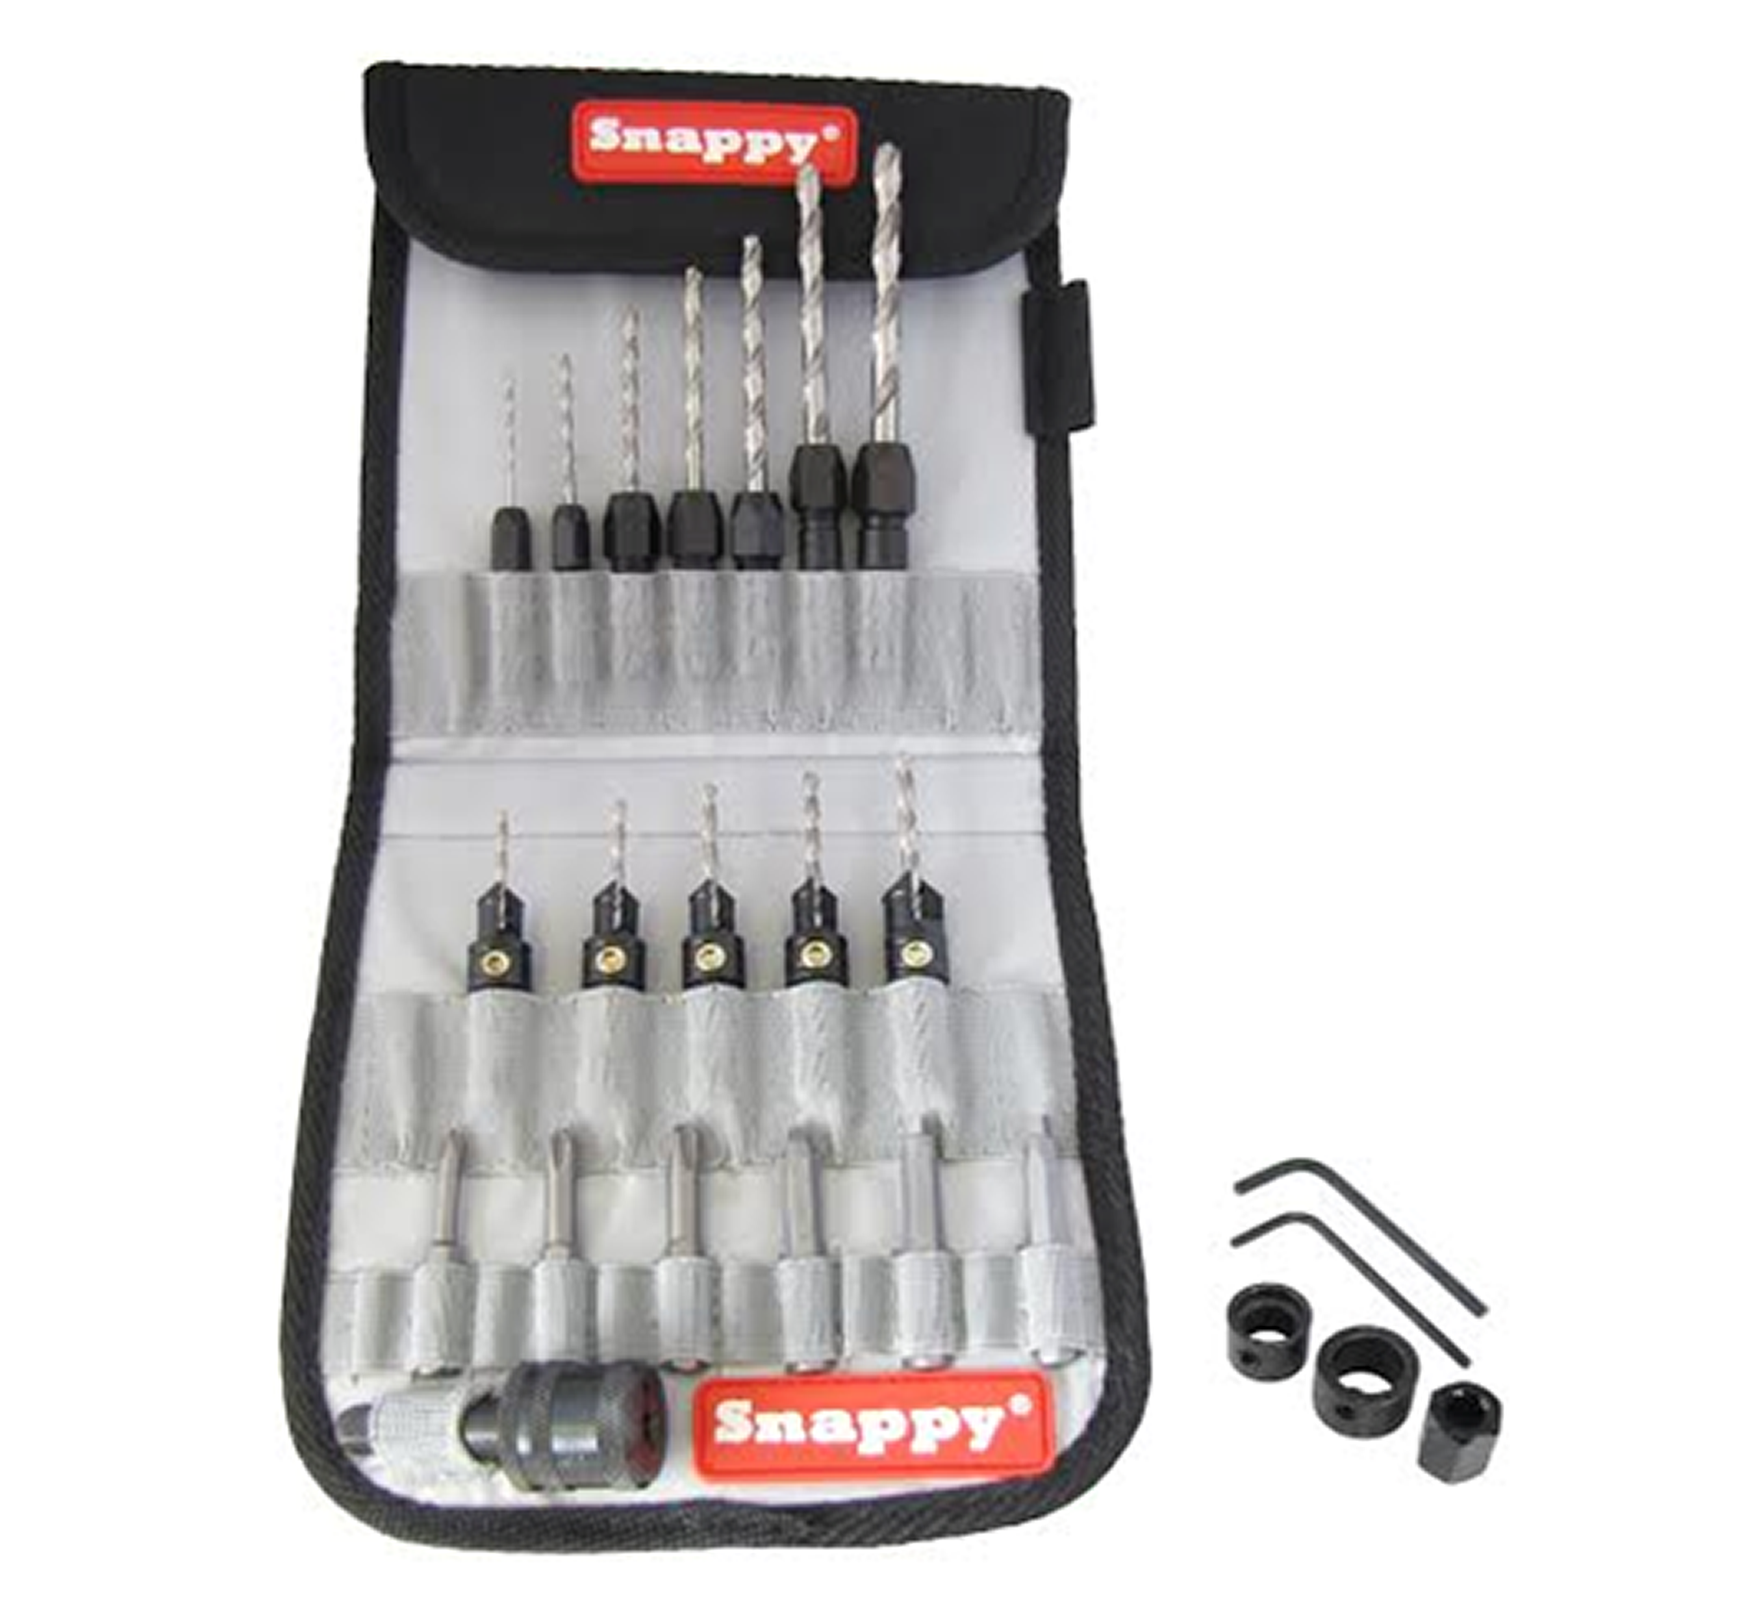 SNAPPY TOOLS Snappy 25 Piece Premium Drilling Accessories Set